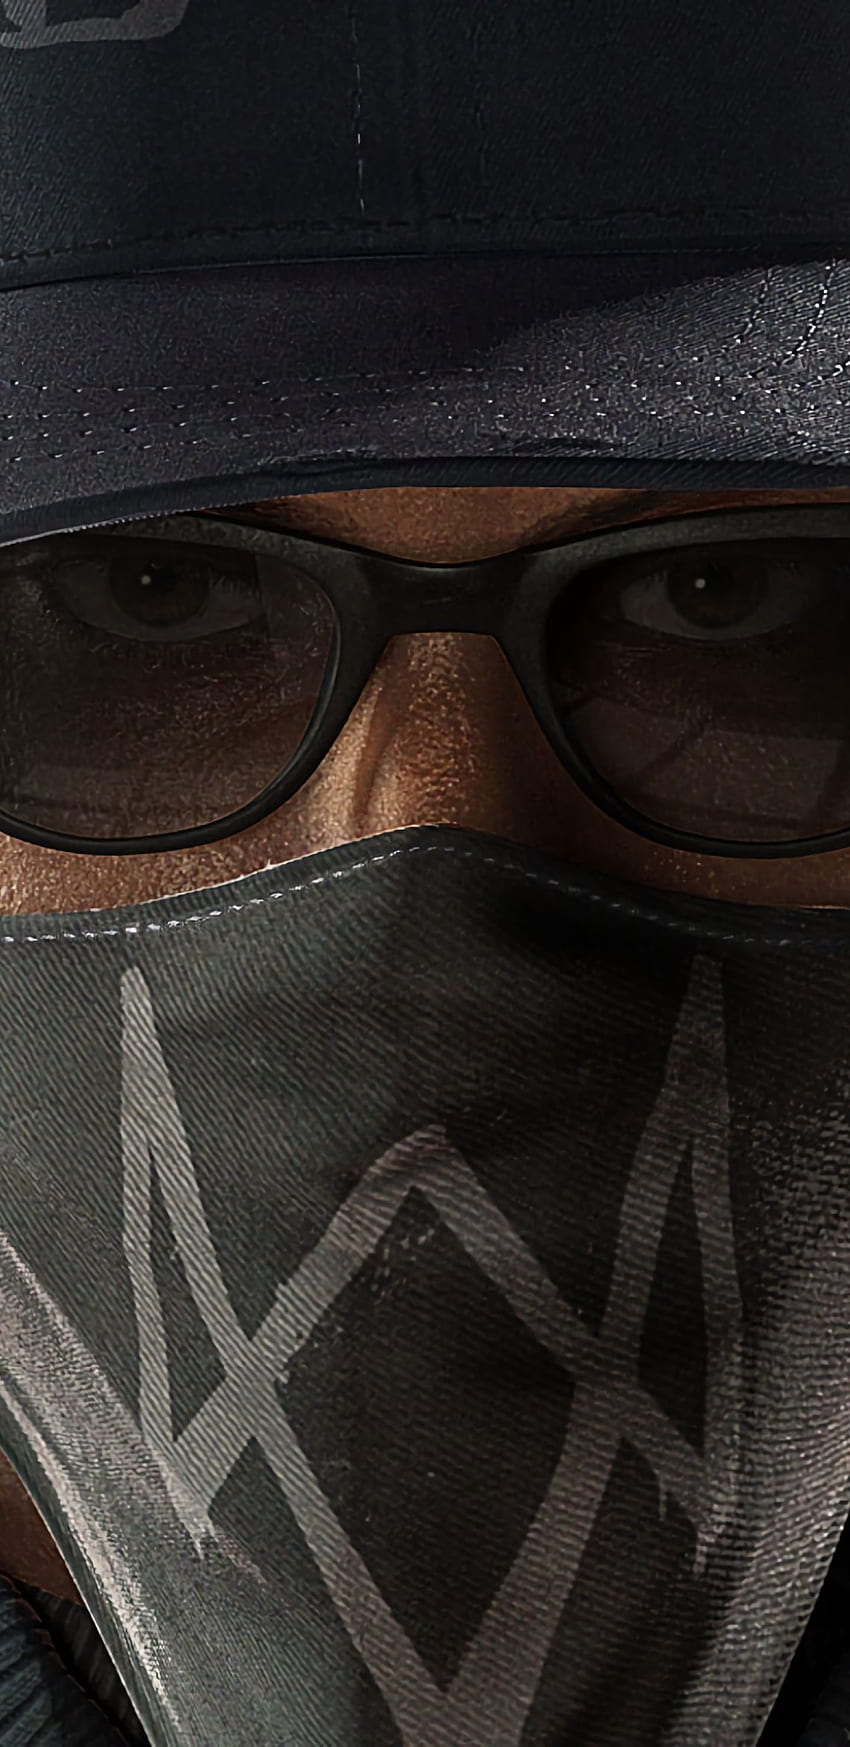 watch dogs 2, marcus holloway, face Samsung Galaxy Note HD phone wallpaper